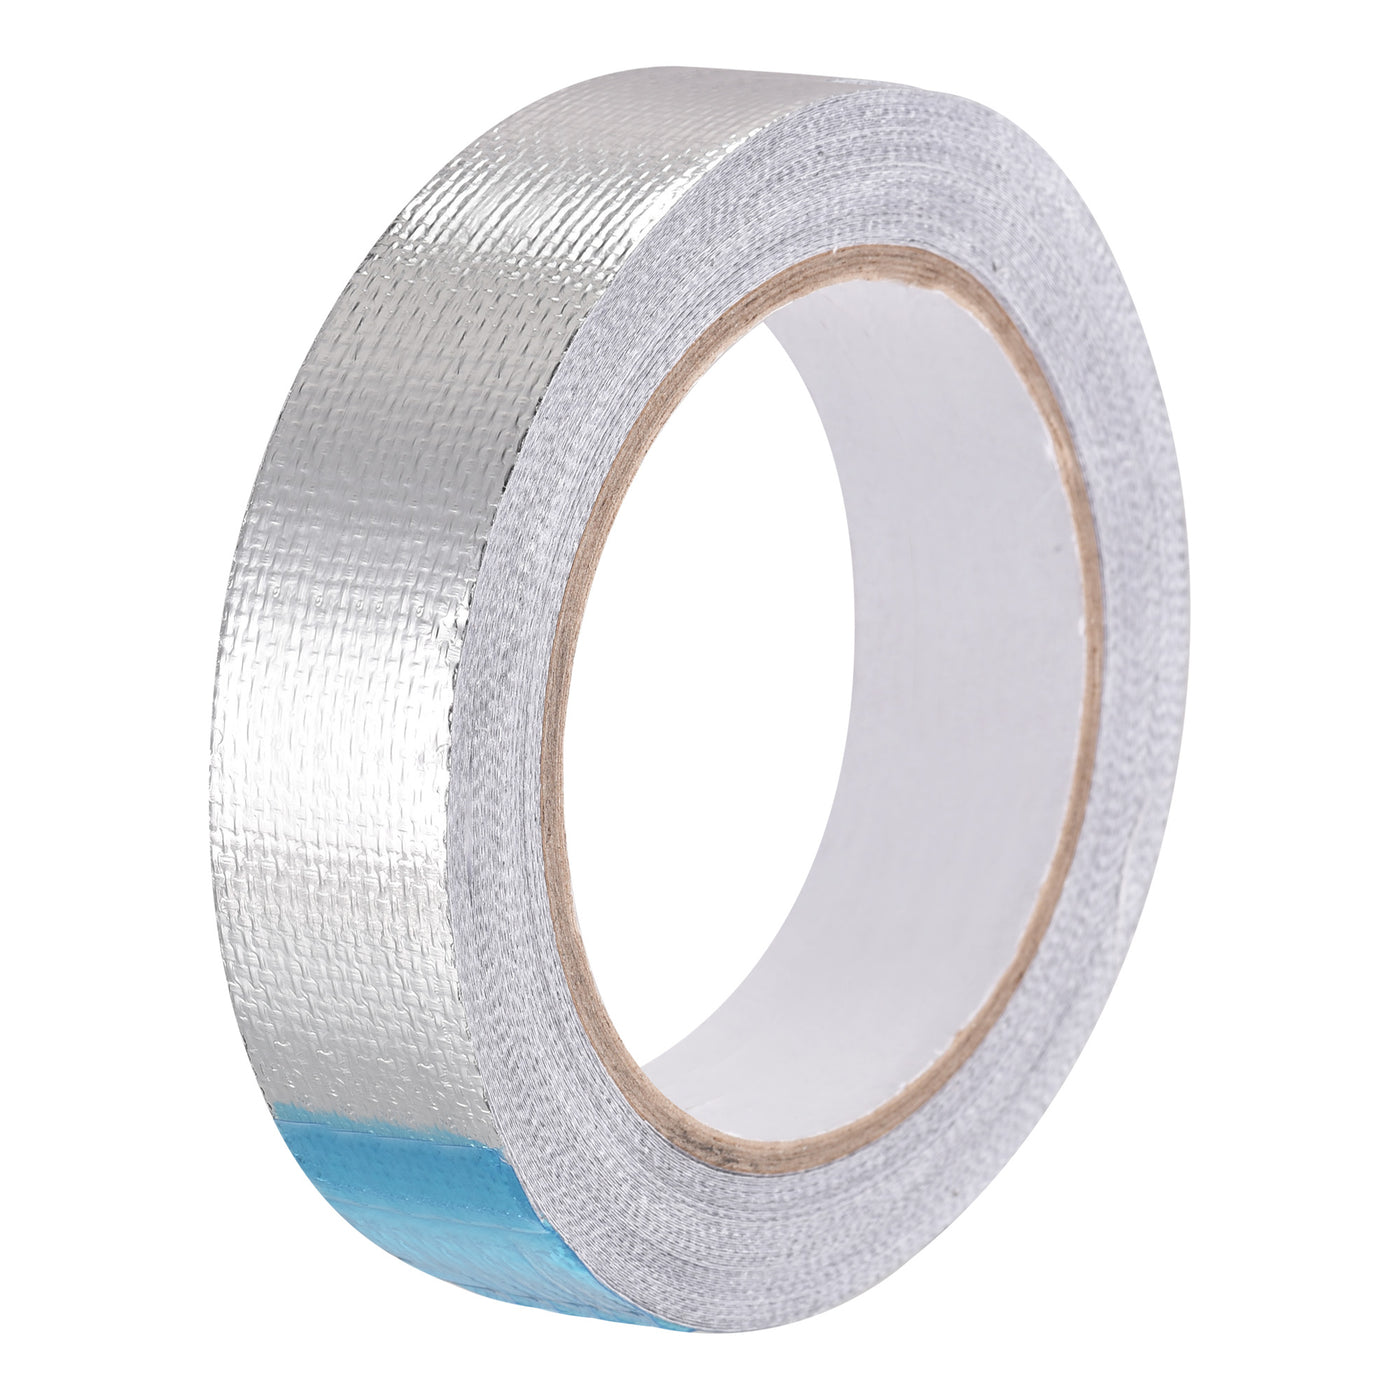 uxcell Uxcell Aluminum Foil Tape High-Temperature Tape for HVAC,Sealing 25mmx20m/65ft